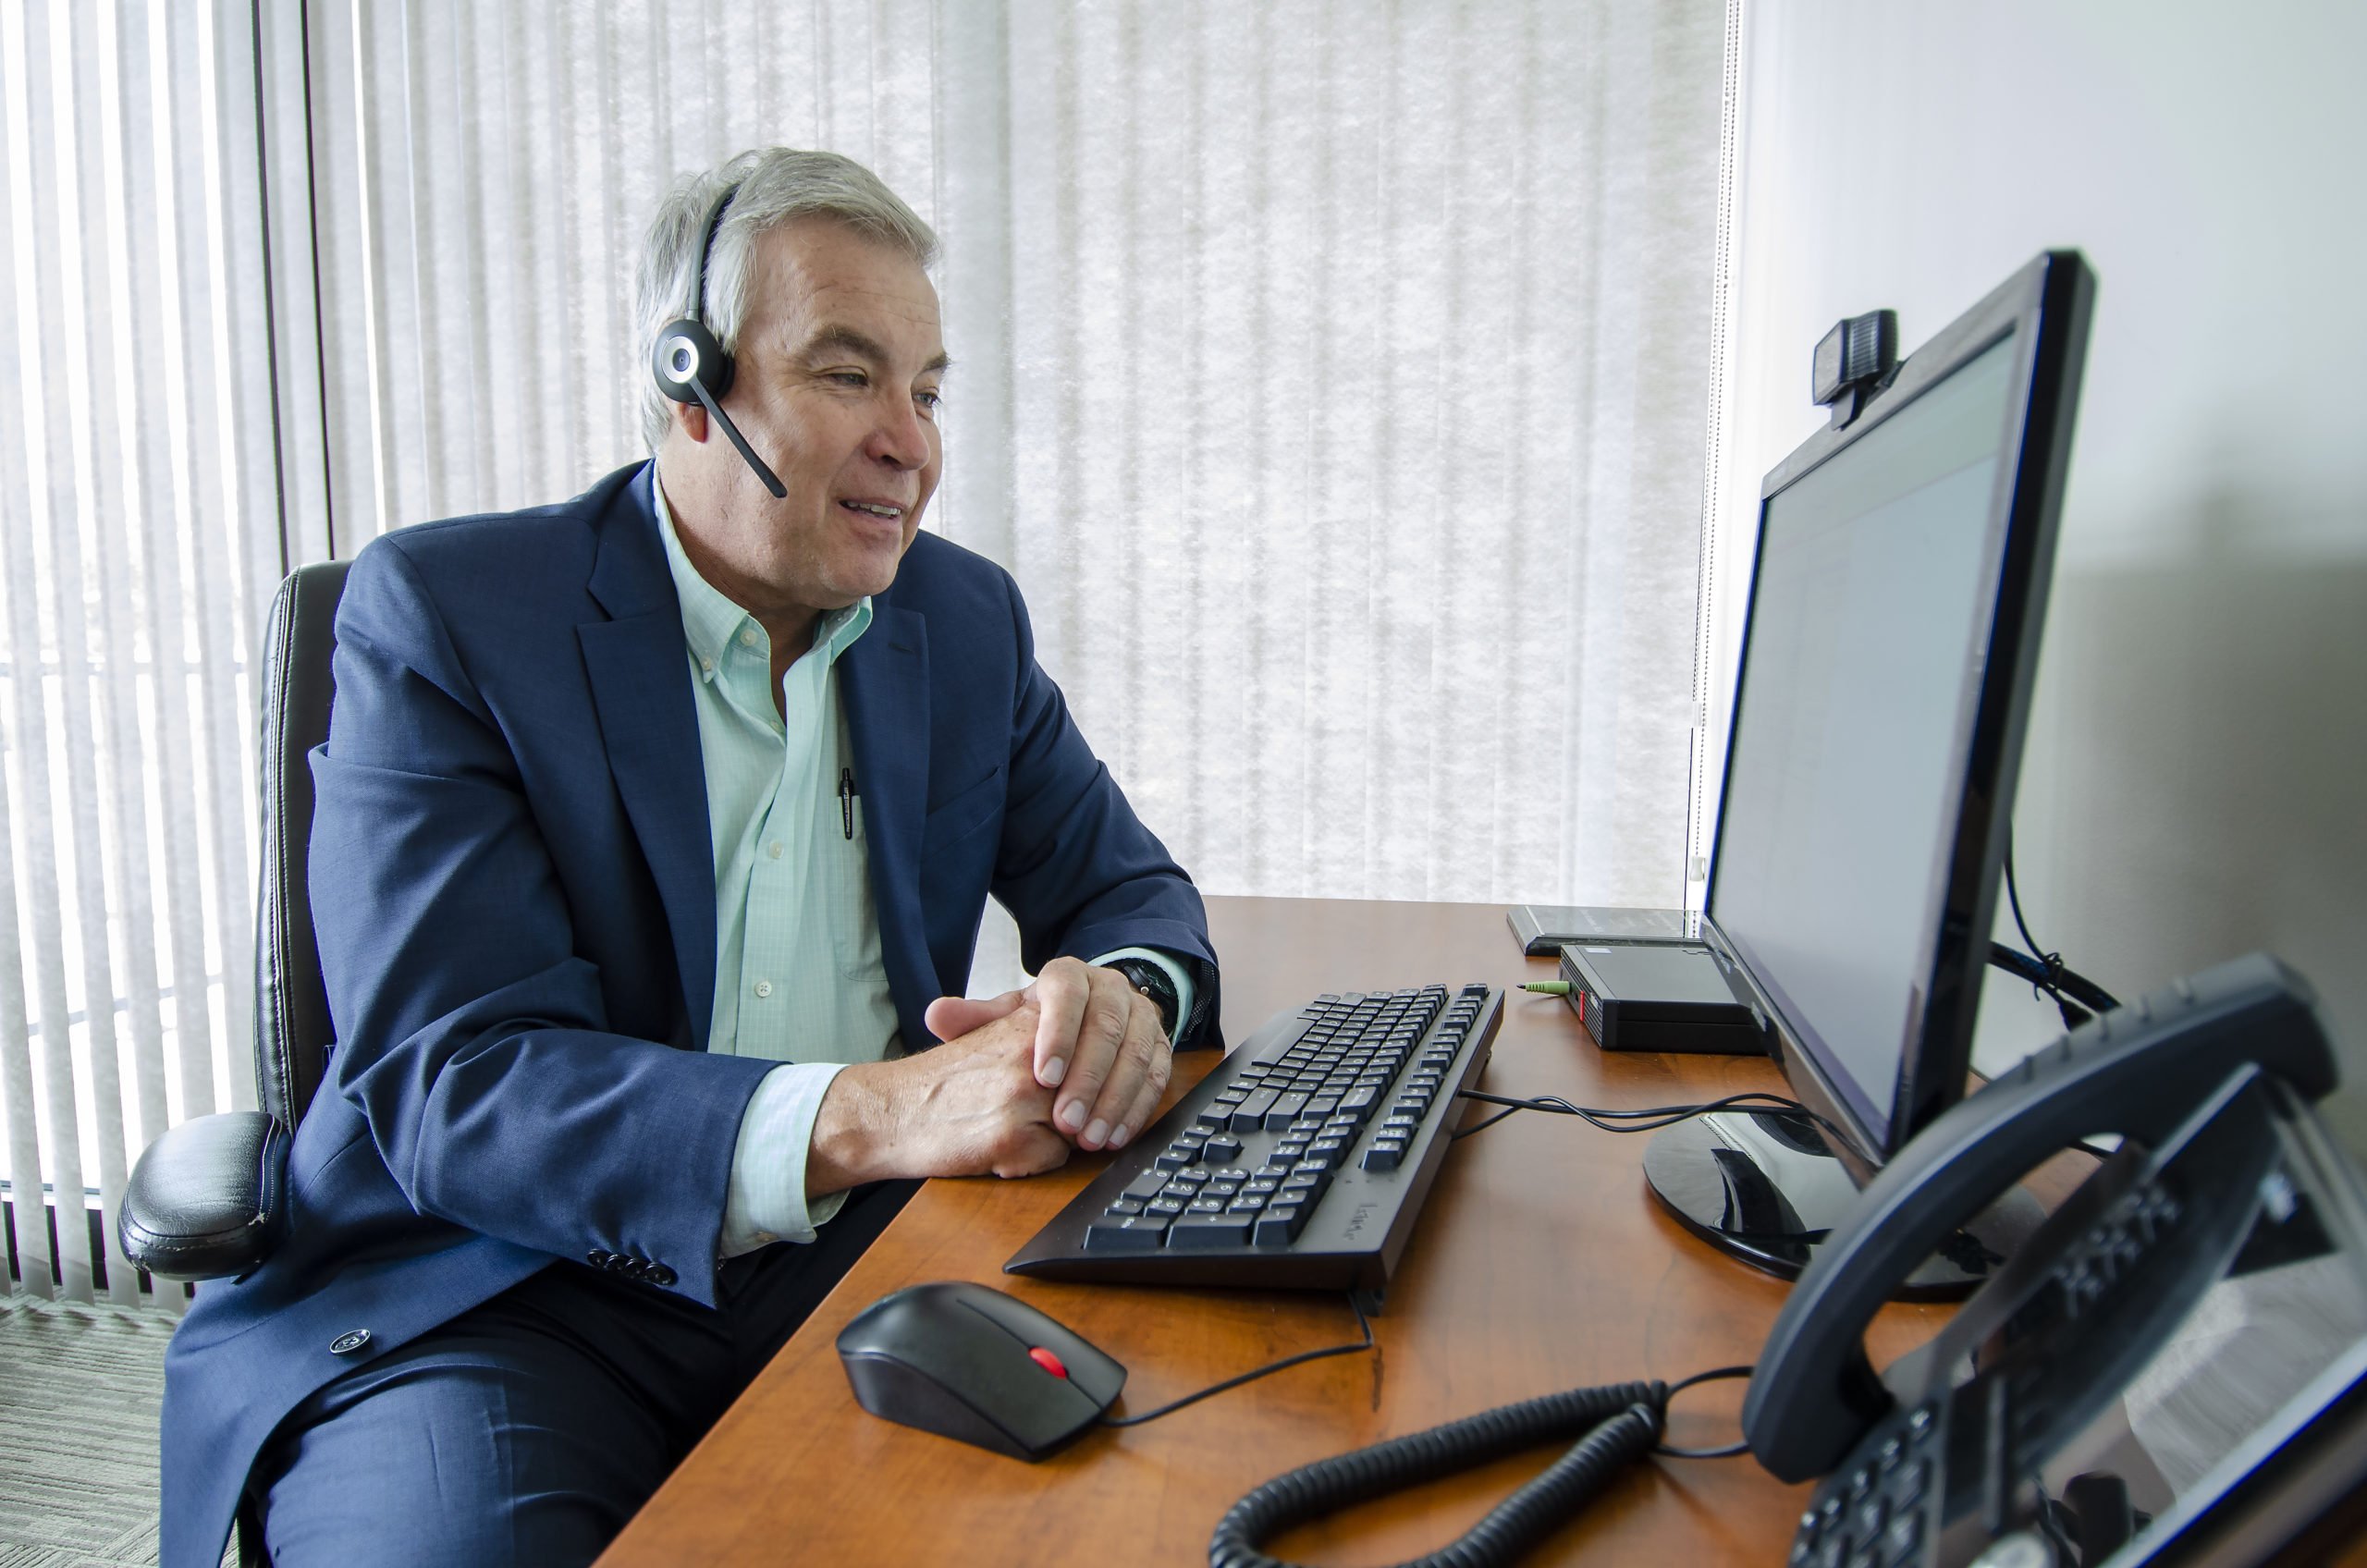 A businessman at his computer takes a call from his headset